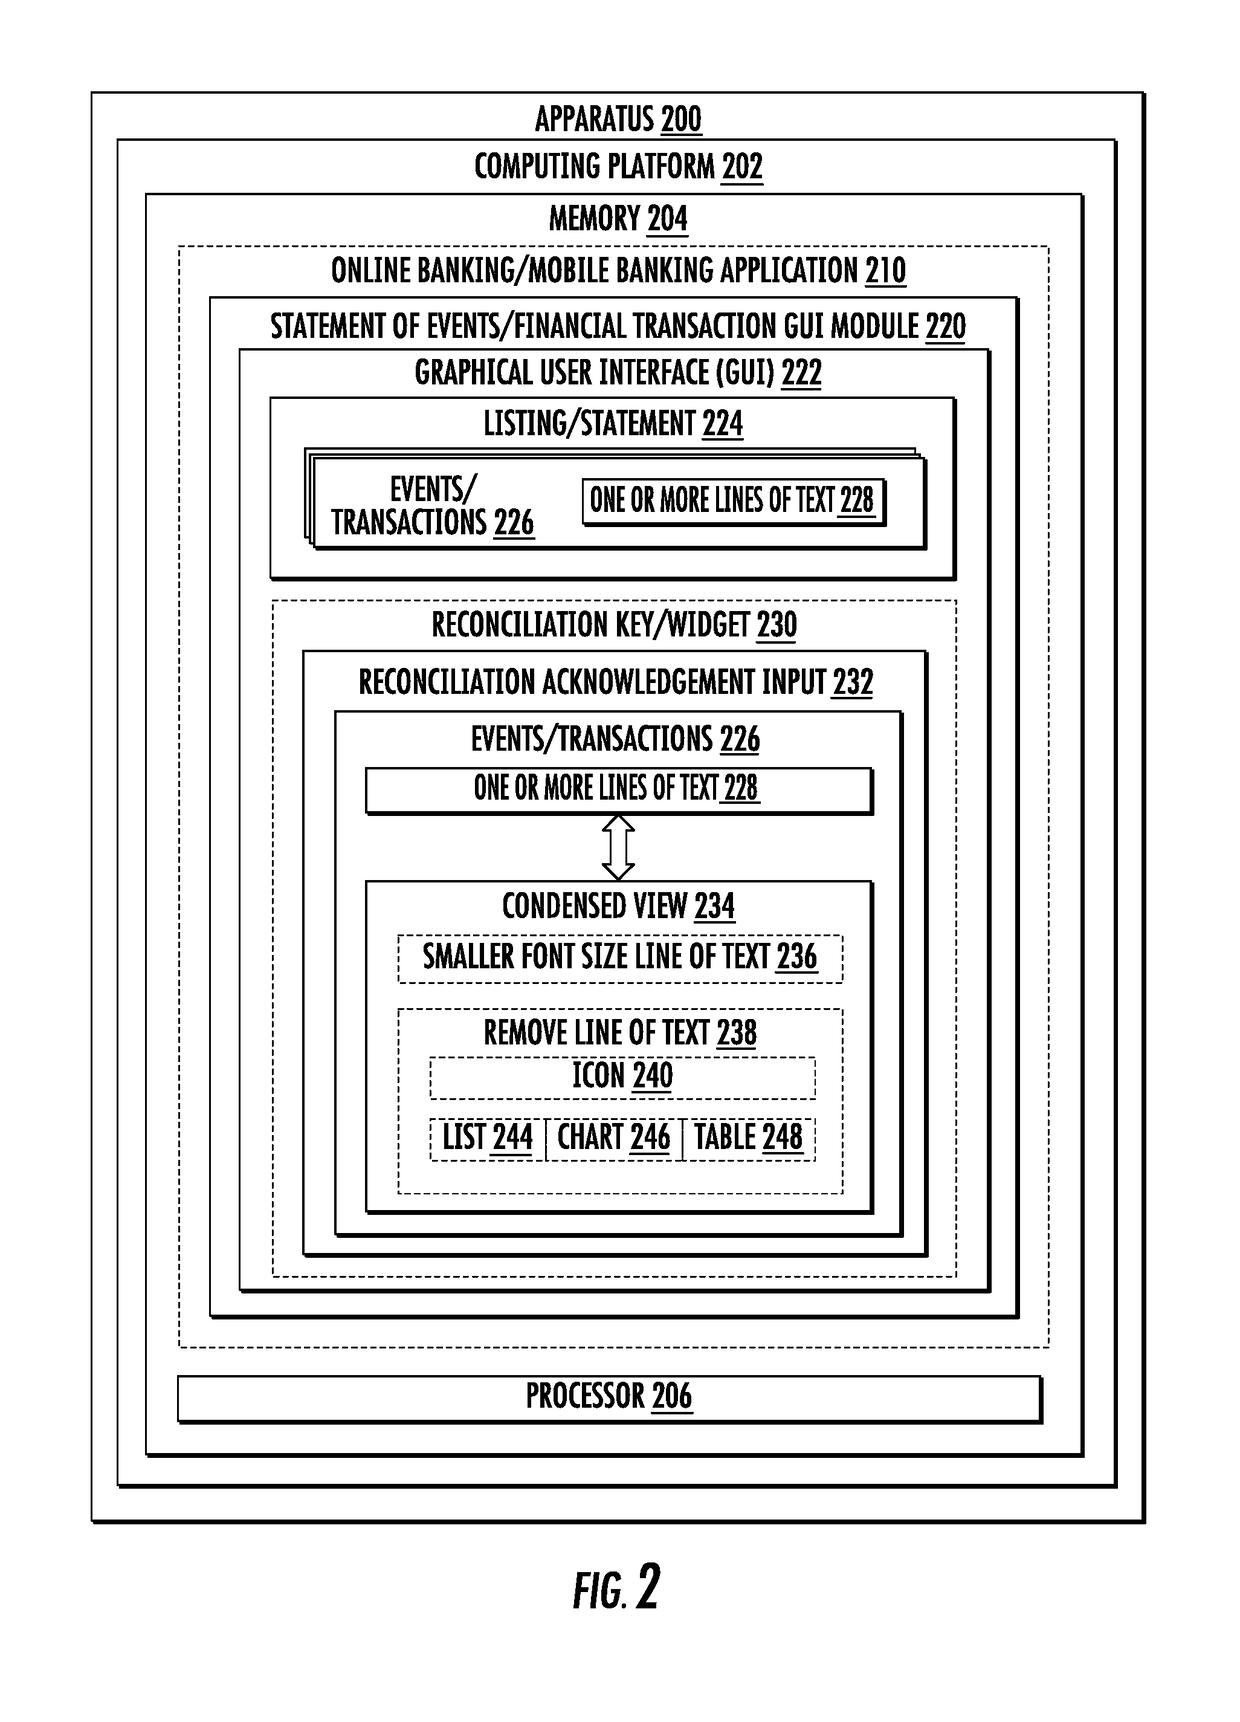 System for reconciling an electronic statement of events